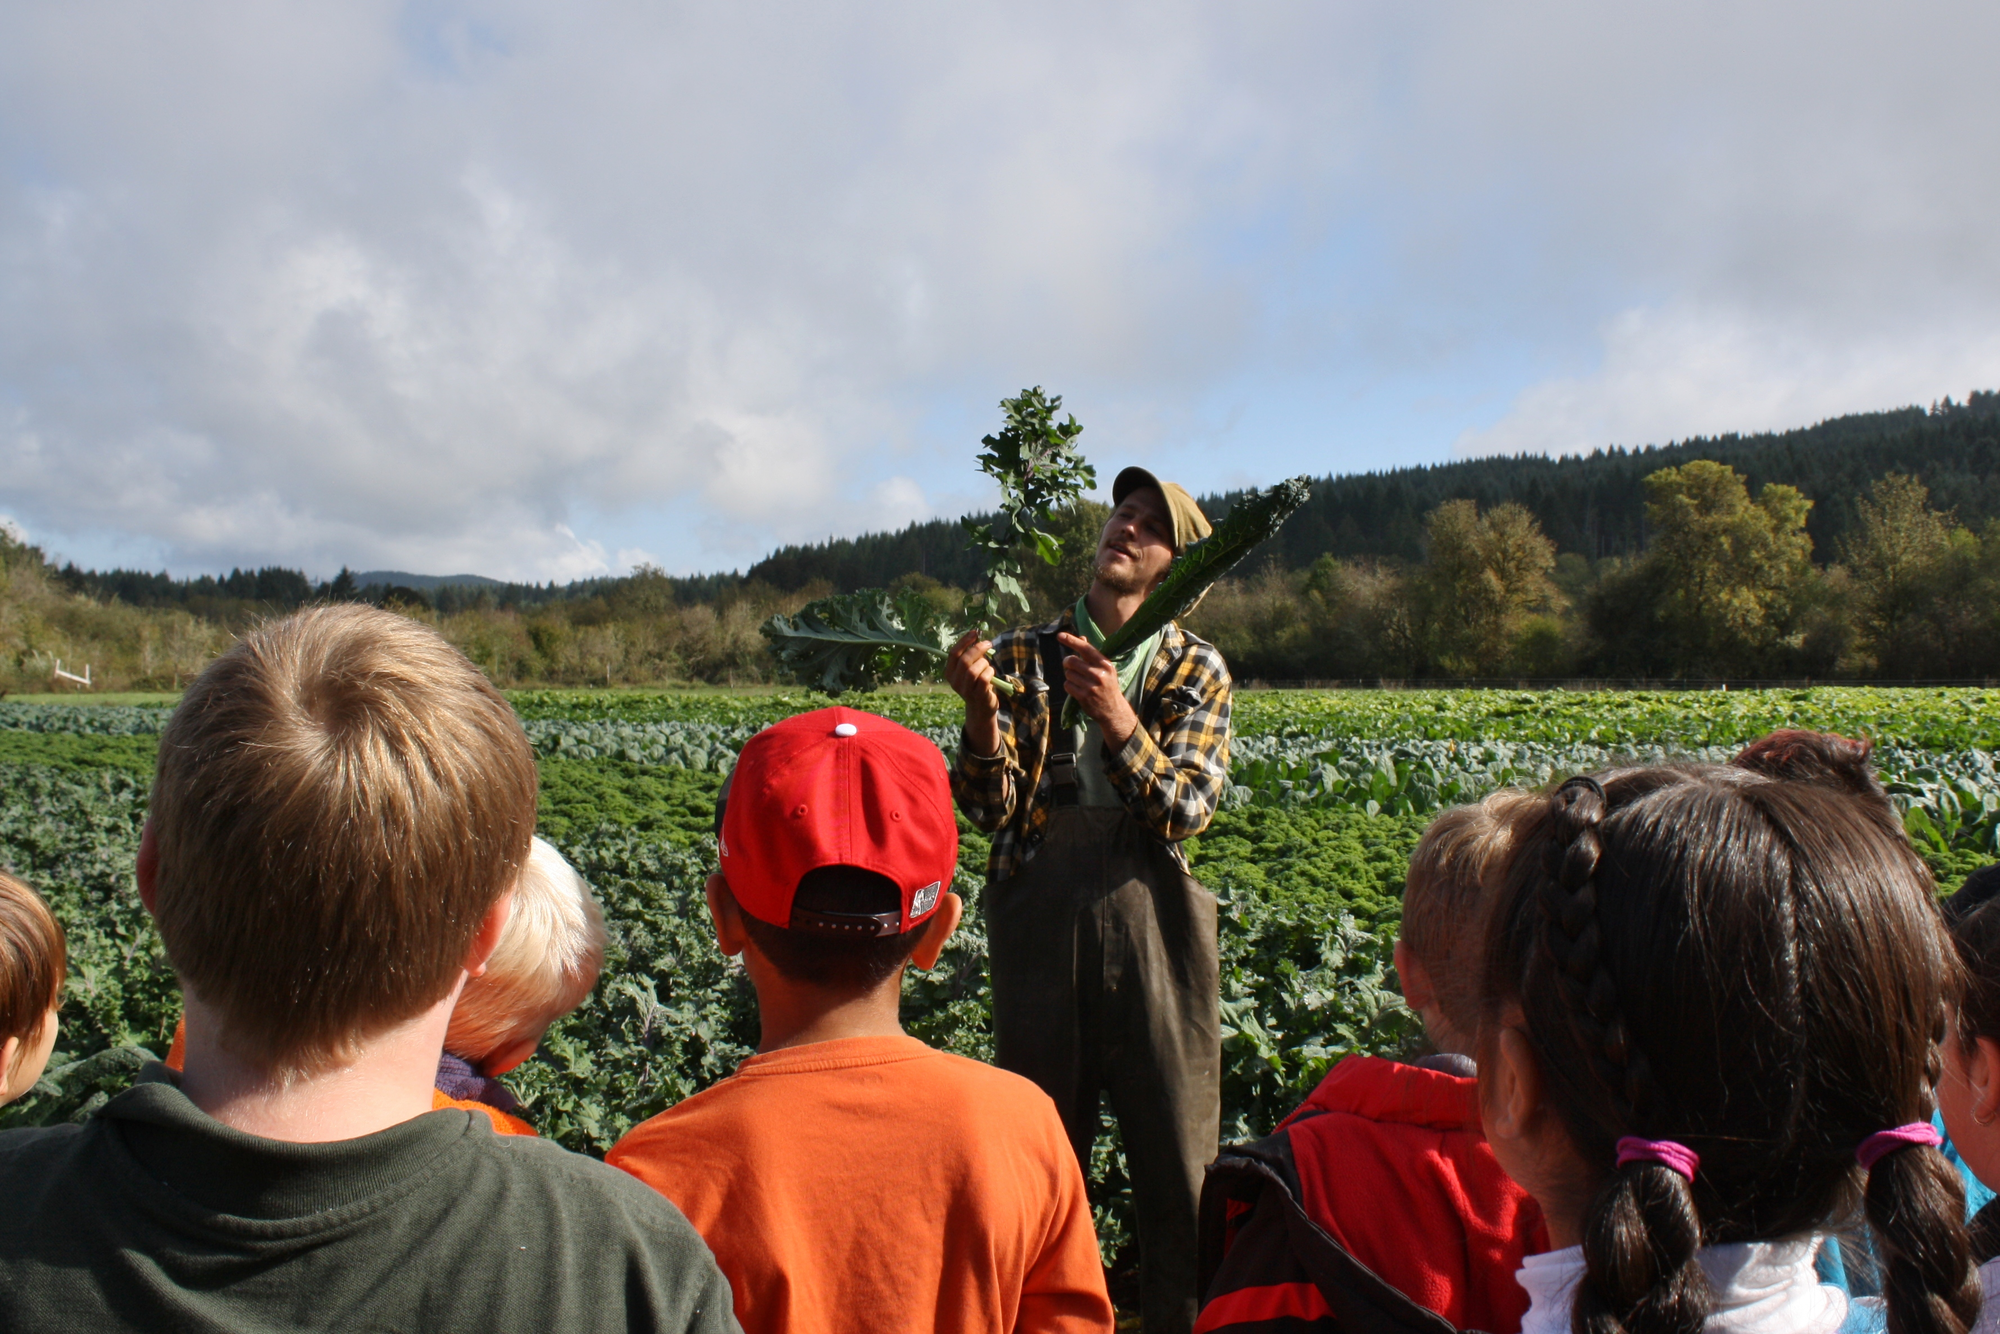 A farmer wearing a plaid shirt, overalls, and a hat stands in front of a field of crops and holds up three different varieties of kale. Children are facing the farmer with their backs turned to the camera.